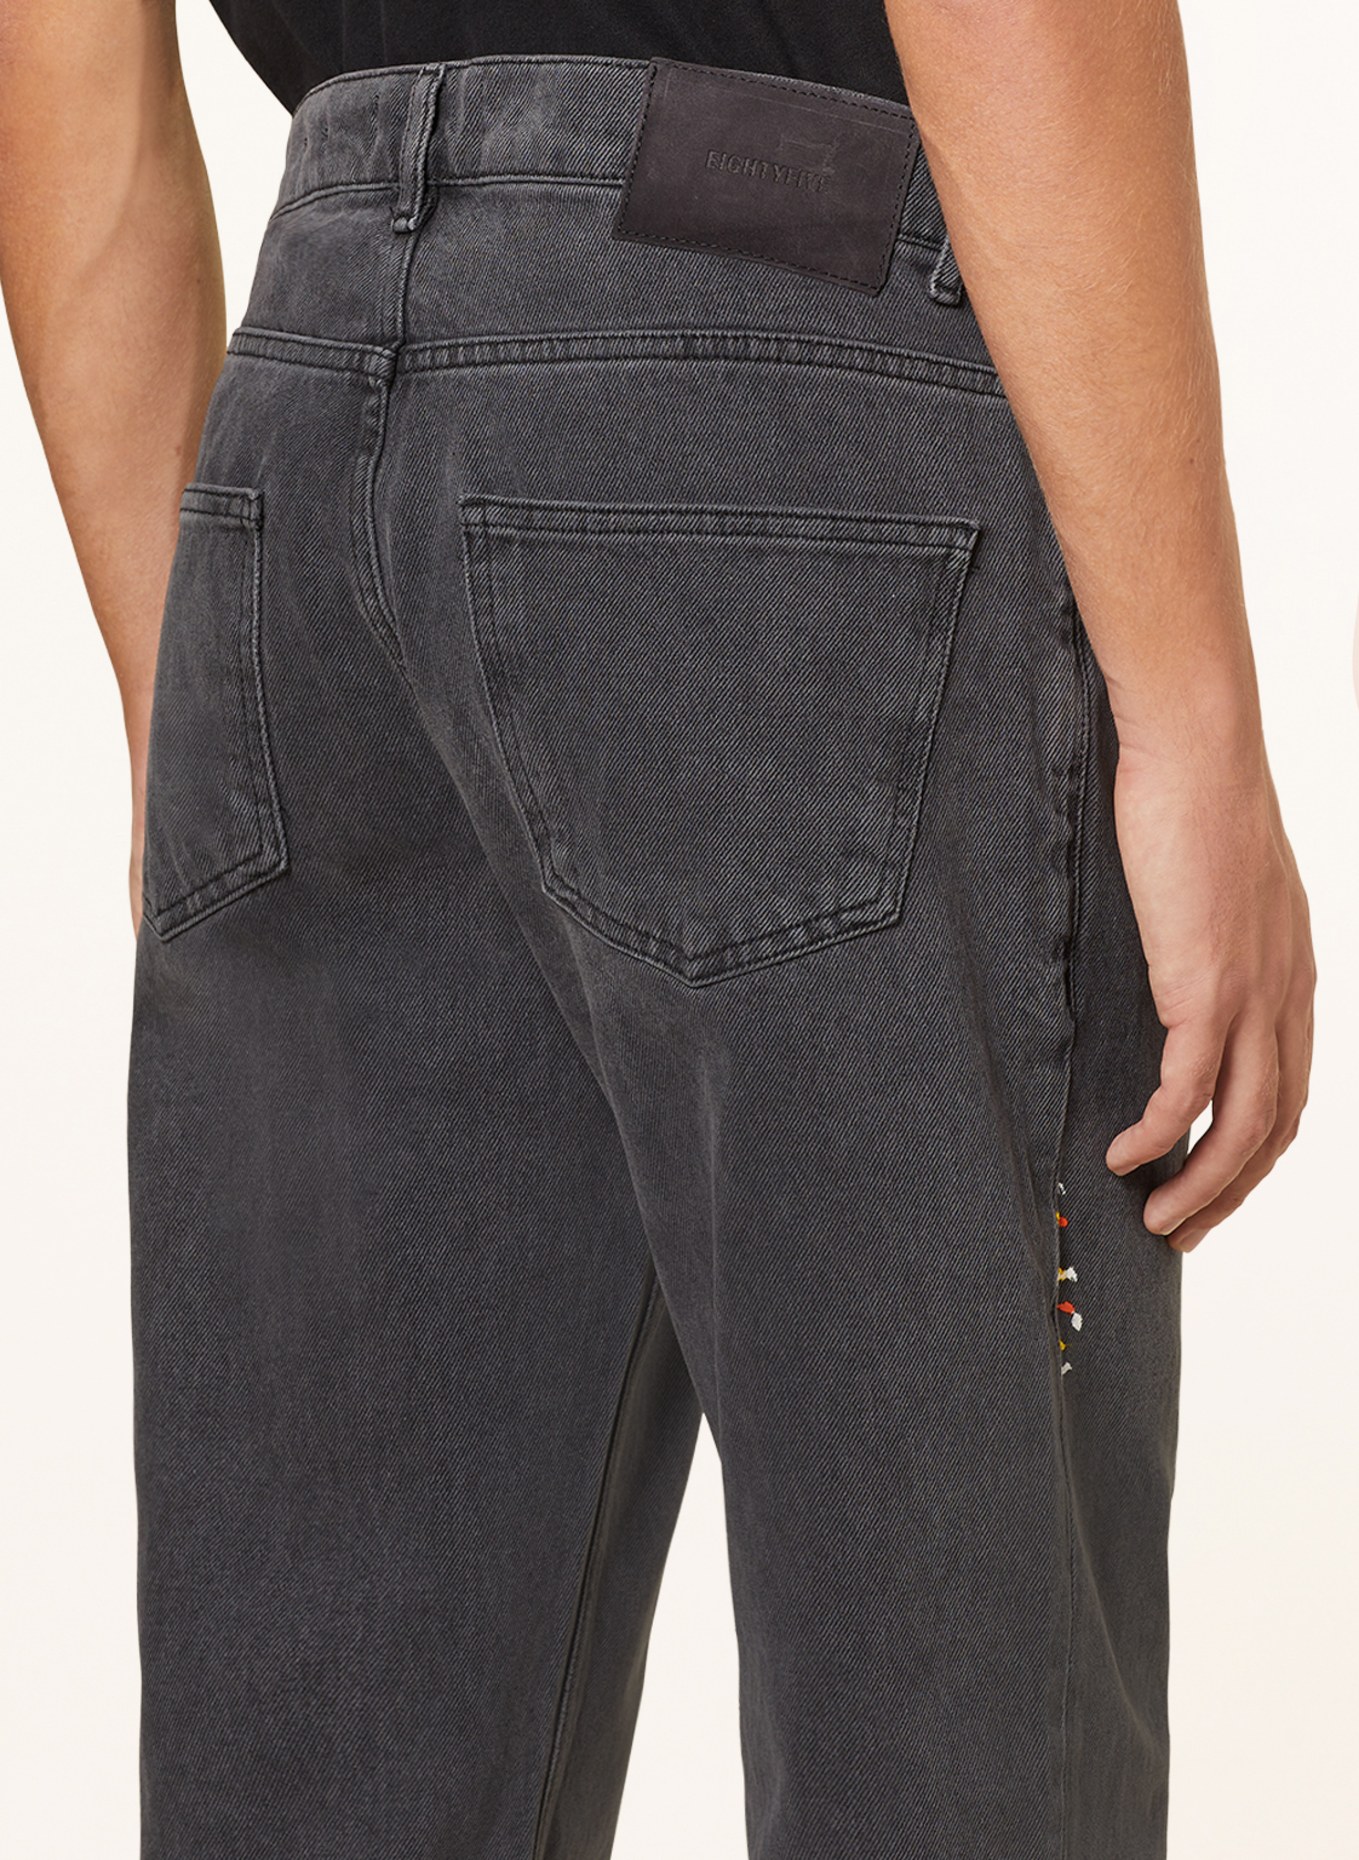 EIGHTYFIVE Jeans straight fit, Color: GRAY (Image 6)